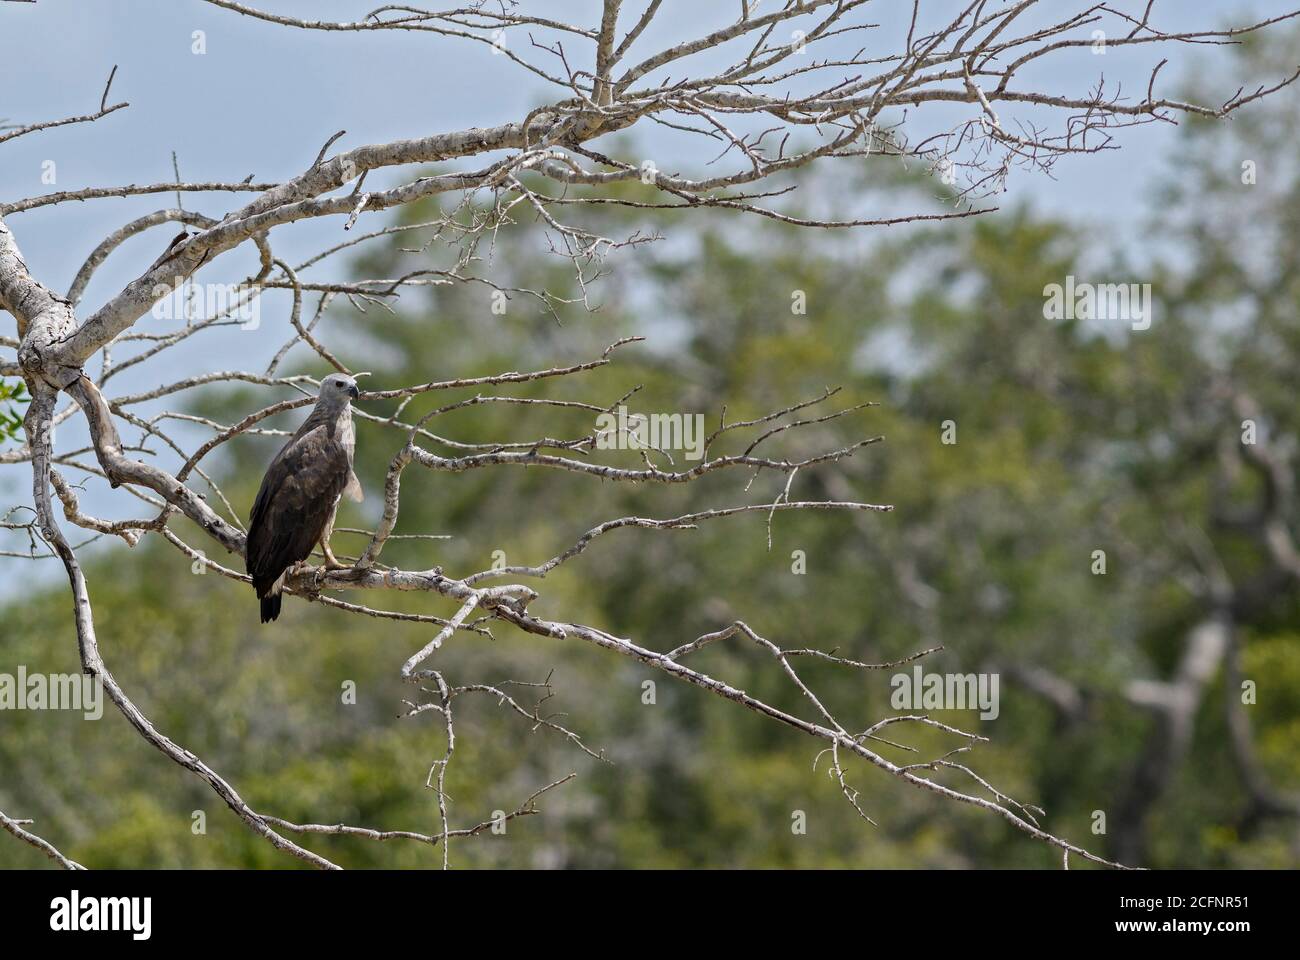 Grey-headed Fish-eagle - Ichthyophaga ichthyaetus, large gray and brown eagle from Asian woodlands and fresh waters, Sri Lanka. Stock Photo